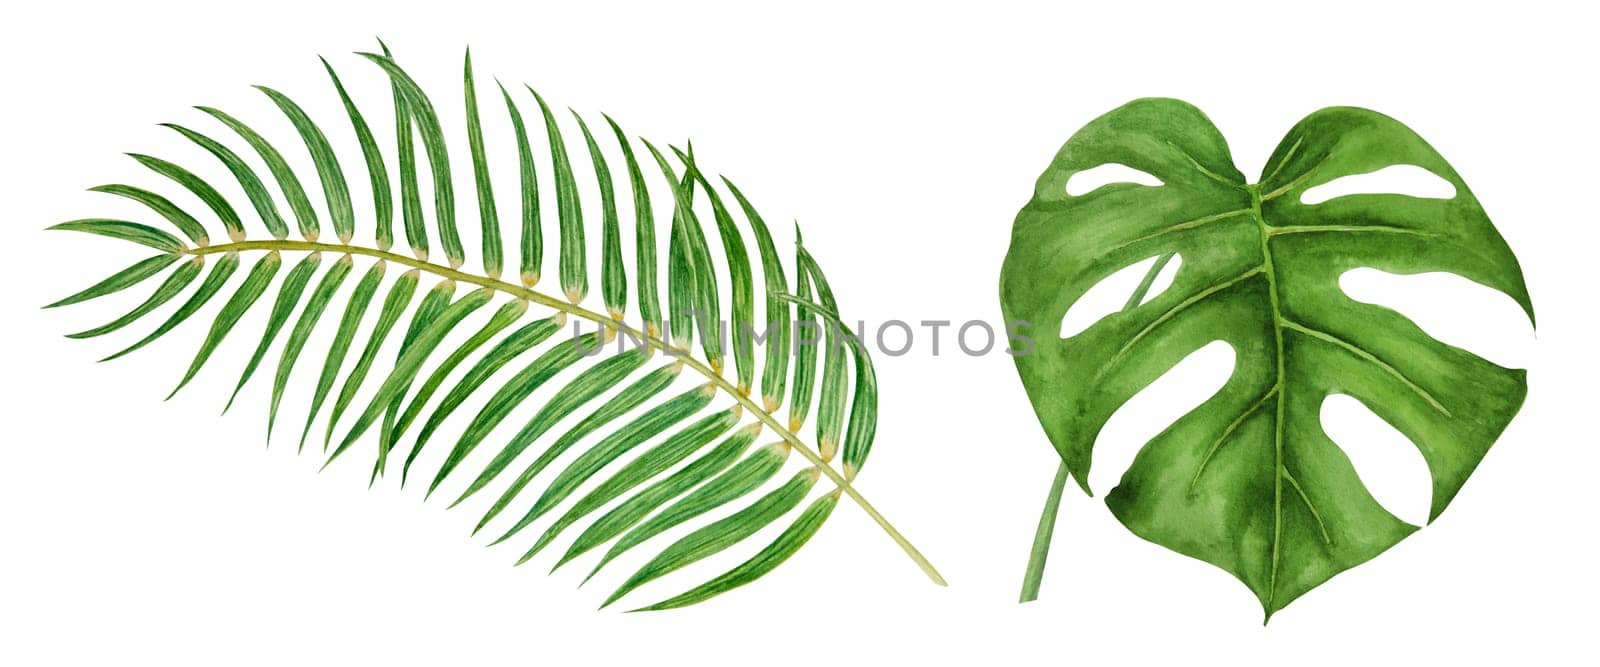 Green Palm and Monstera leaves. Watercolor hand drawn illustration of tropical plant for travel guides, cosmetic, spa, massage salon prints, wedding invitations, cards, packing. Jungle liana clip art. by florainlove_art